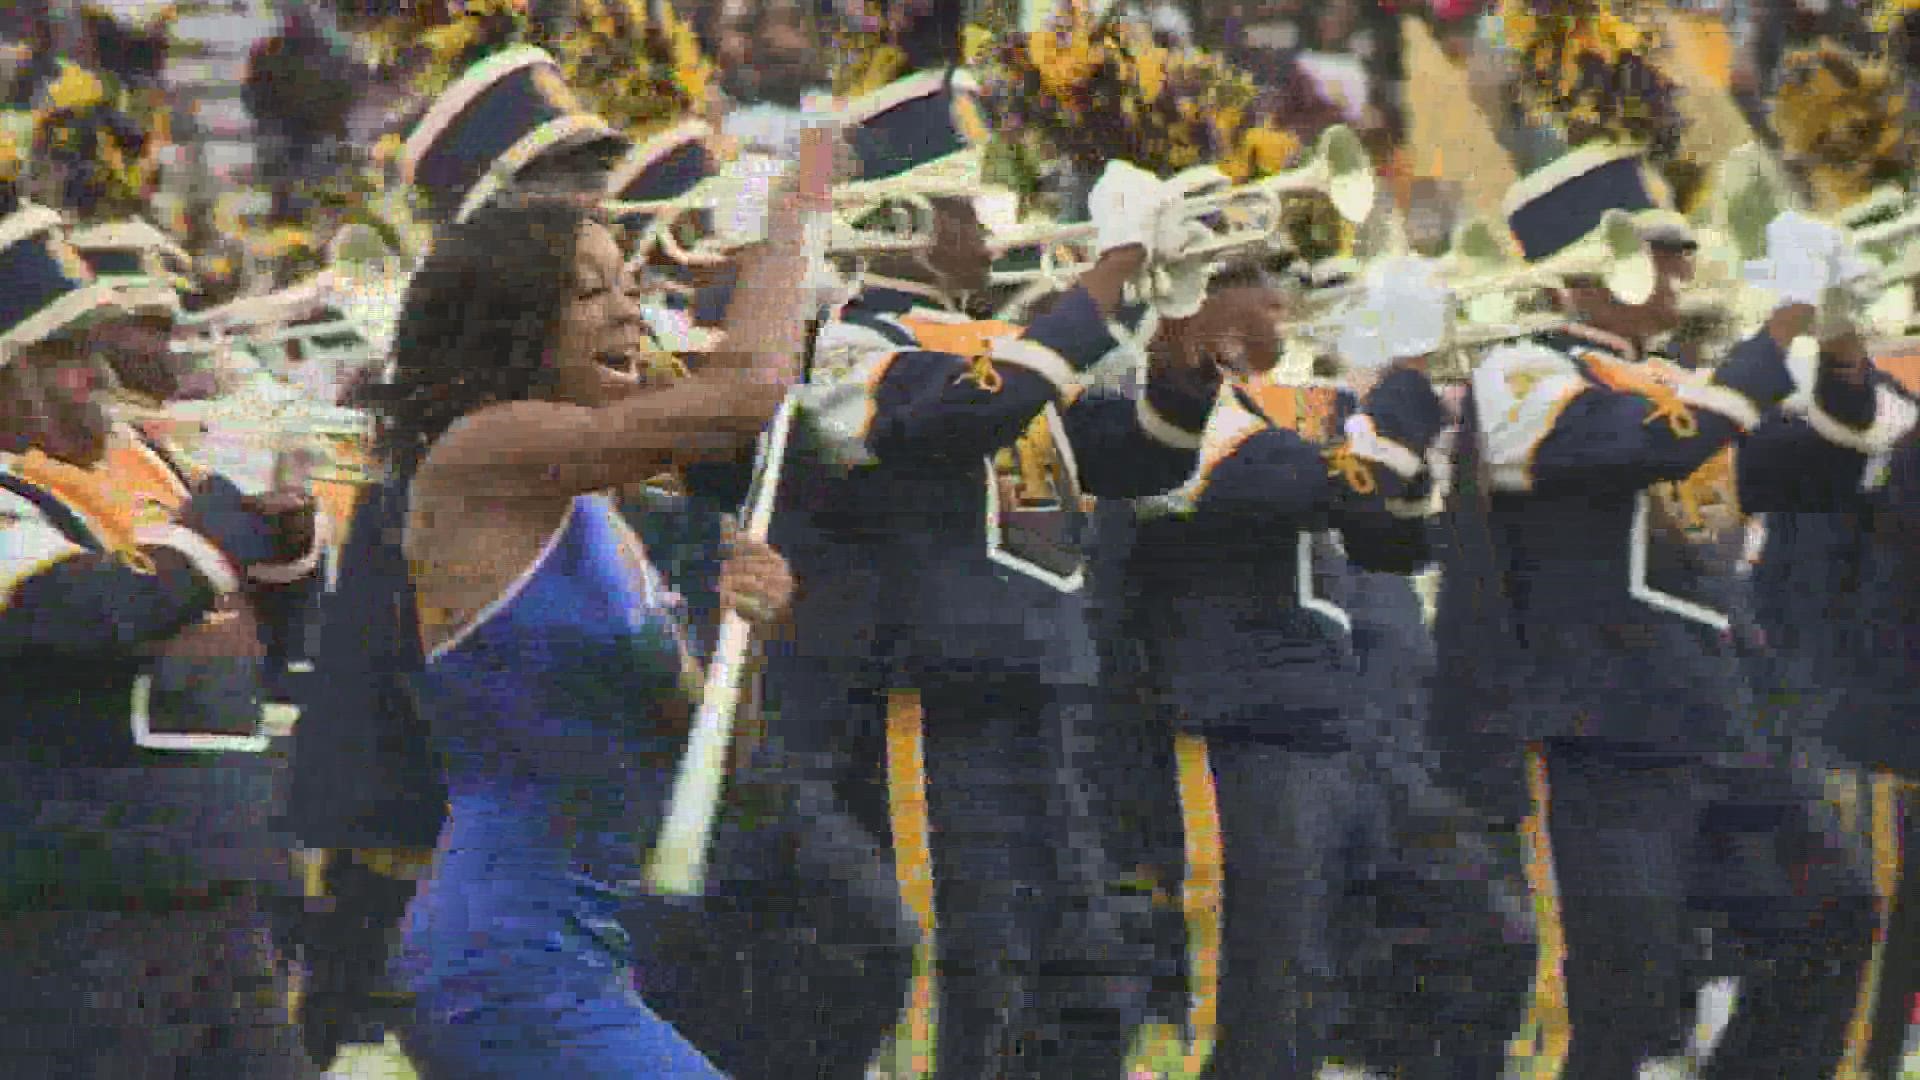 NC A&T returns Oct. 29 and business are excited